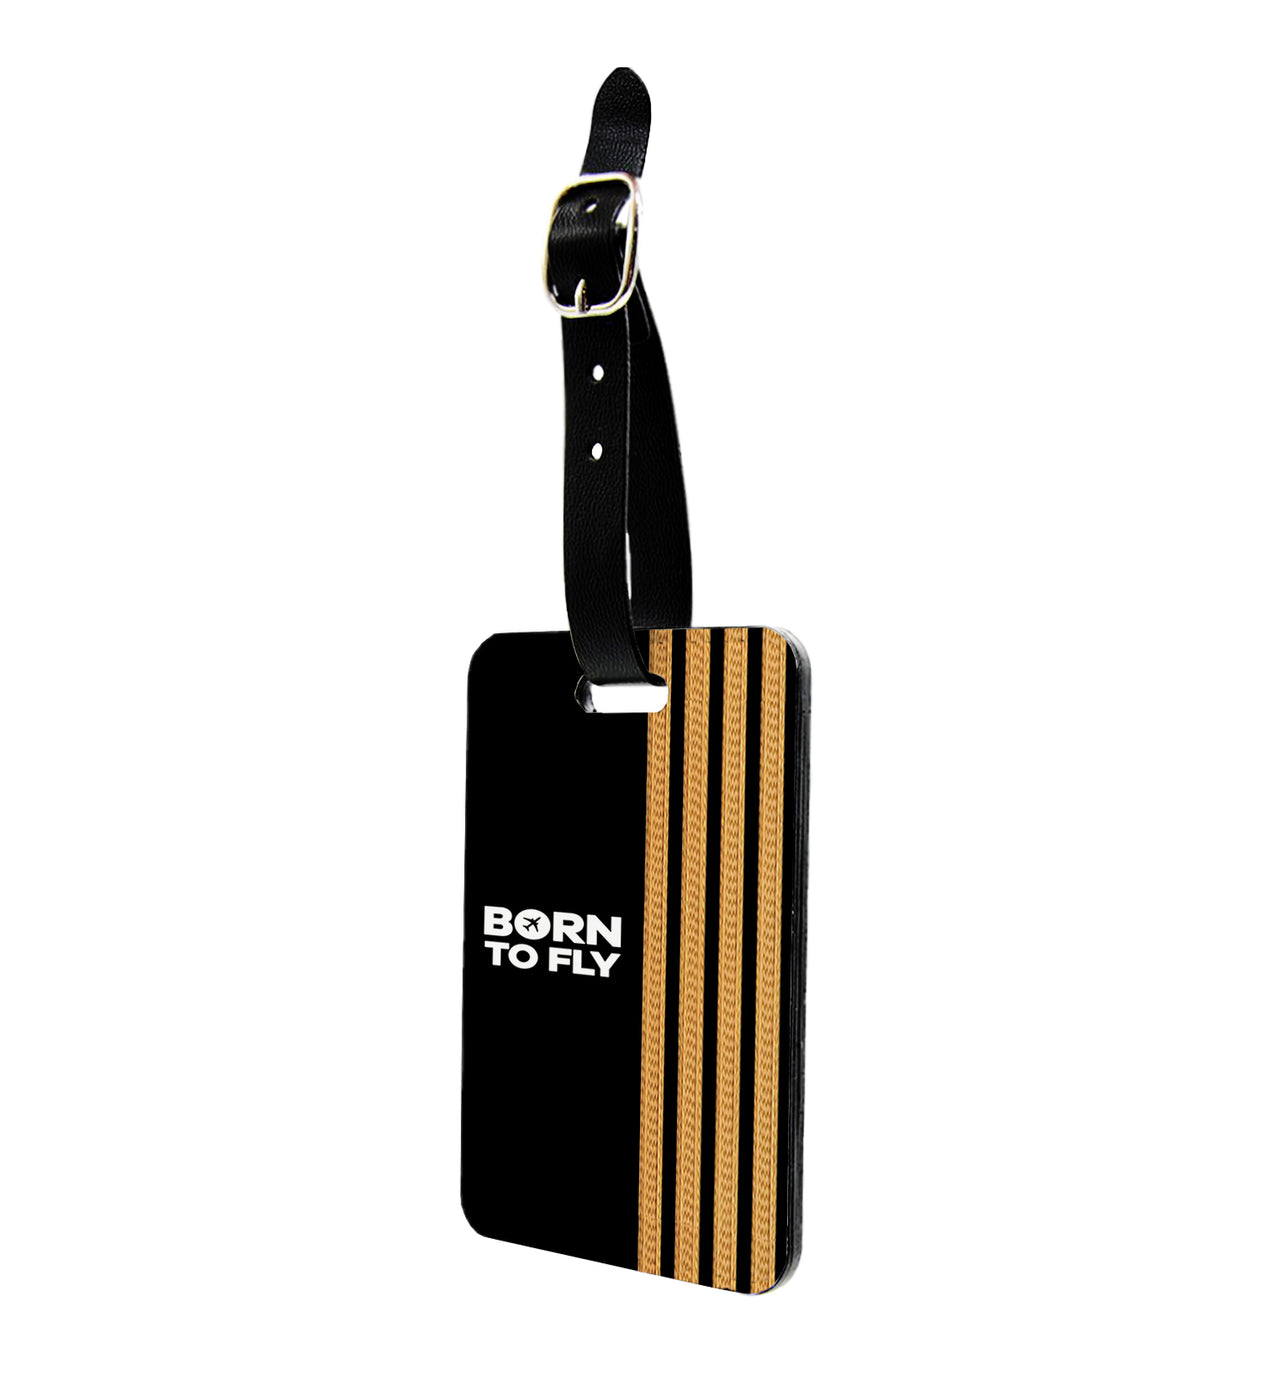 Born to Fly & Pilot Epaulettes (4,3,2 Lines) Designed Luggage Tag